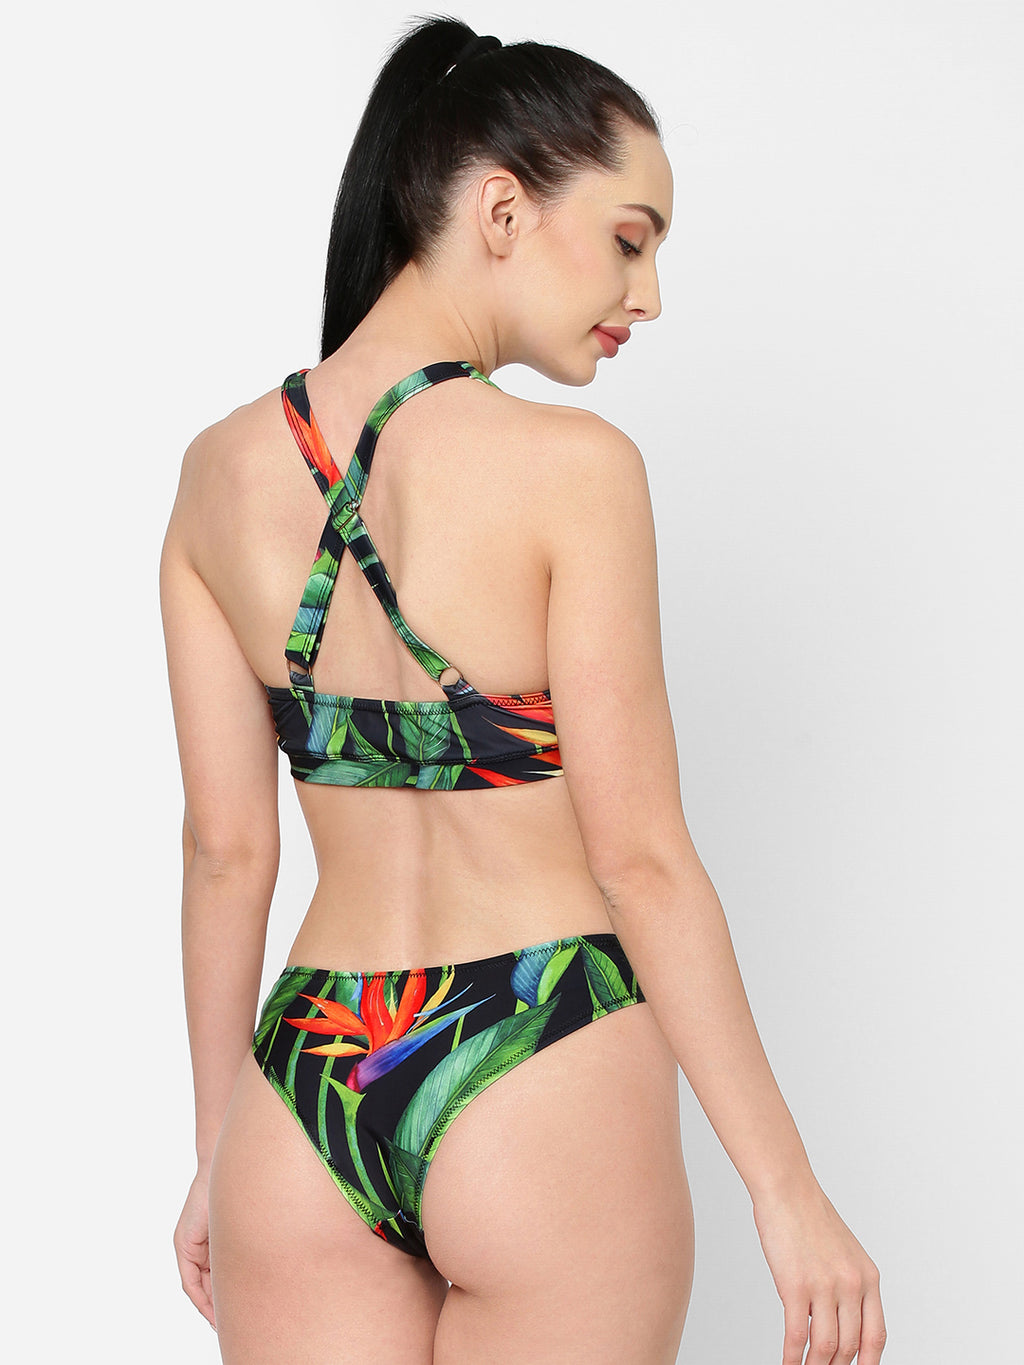 ESHA LAL for The Beach Company Online Swimwear Sustainable Cheap Swimsuits on Discount